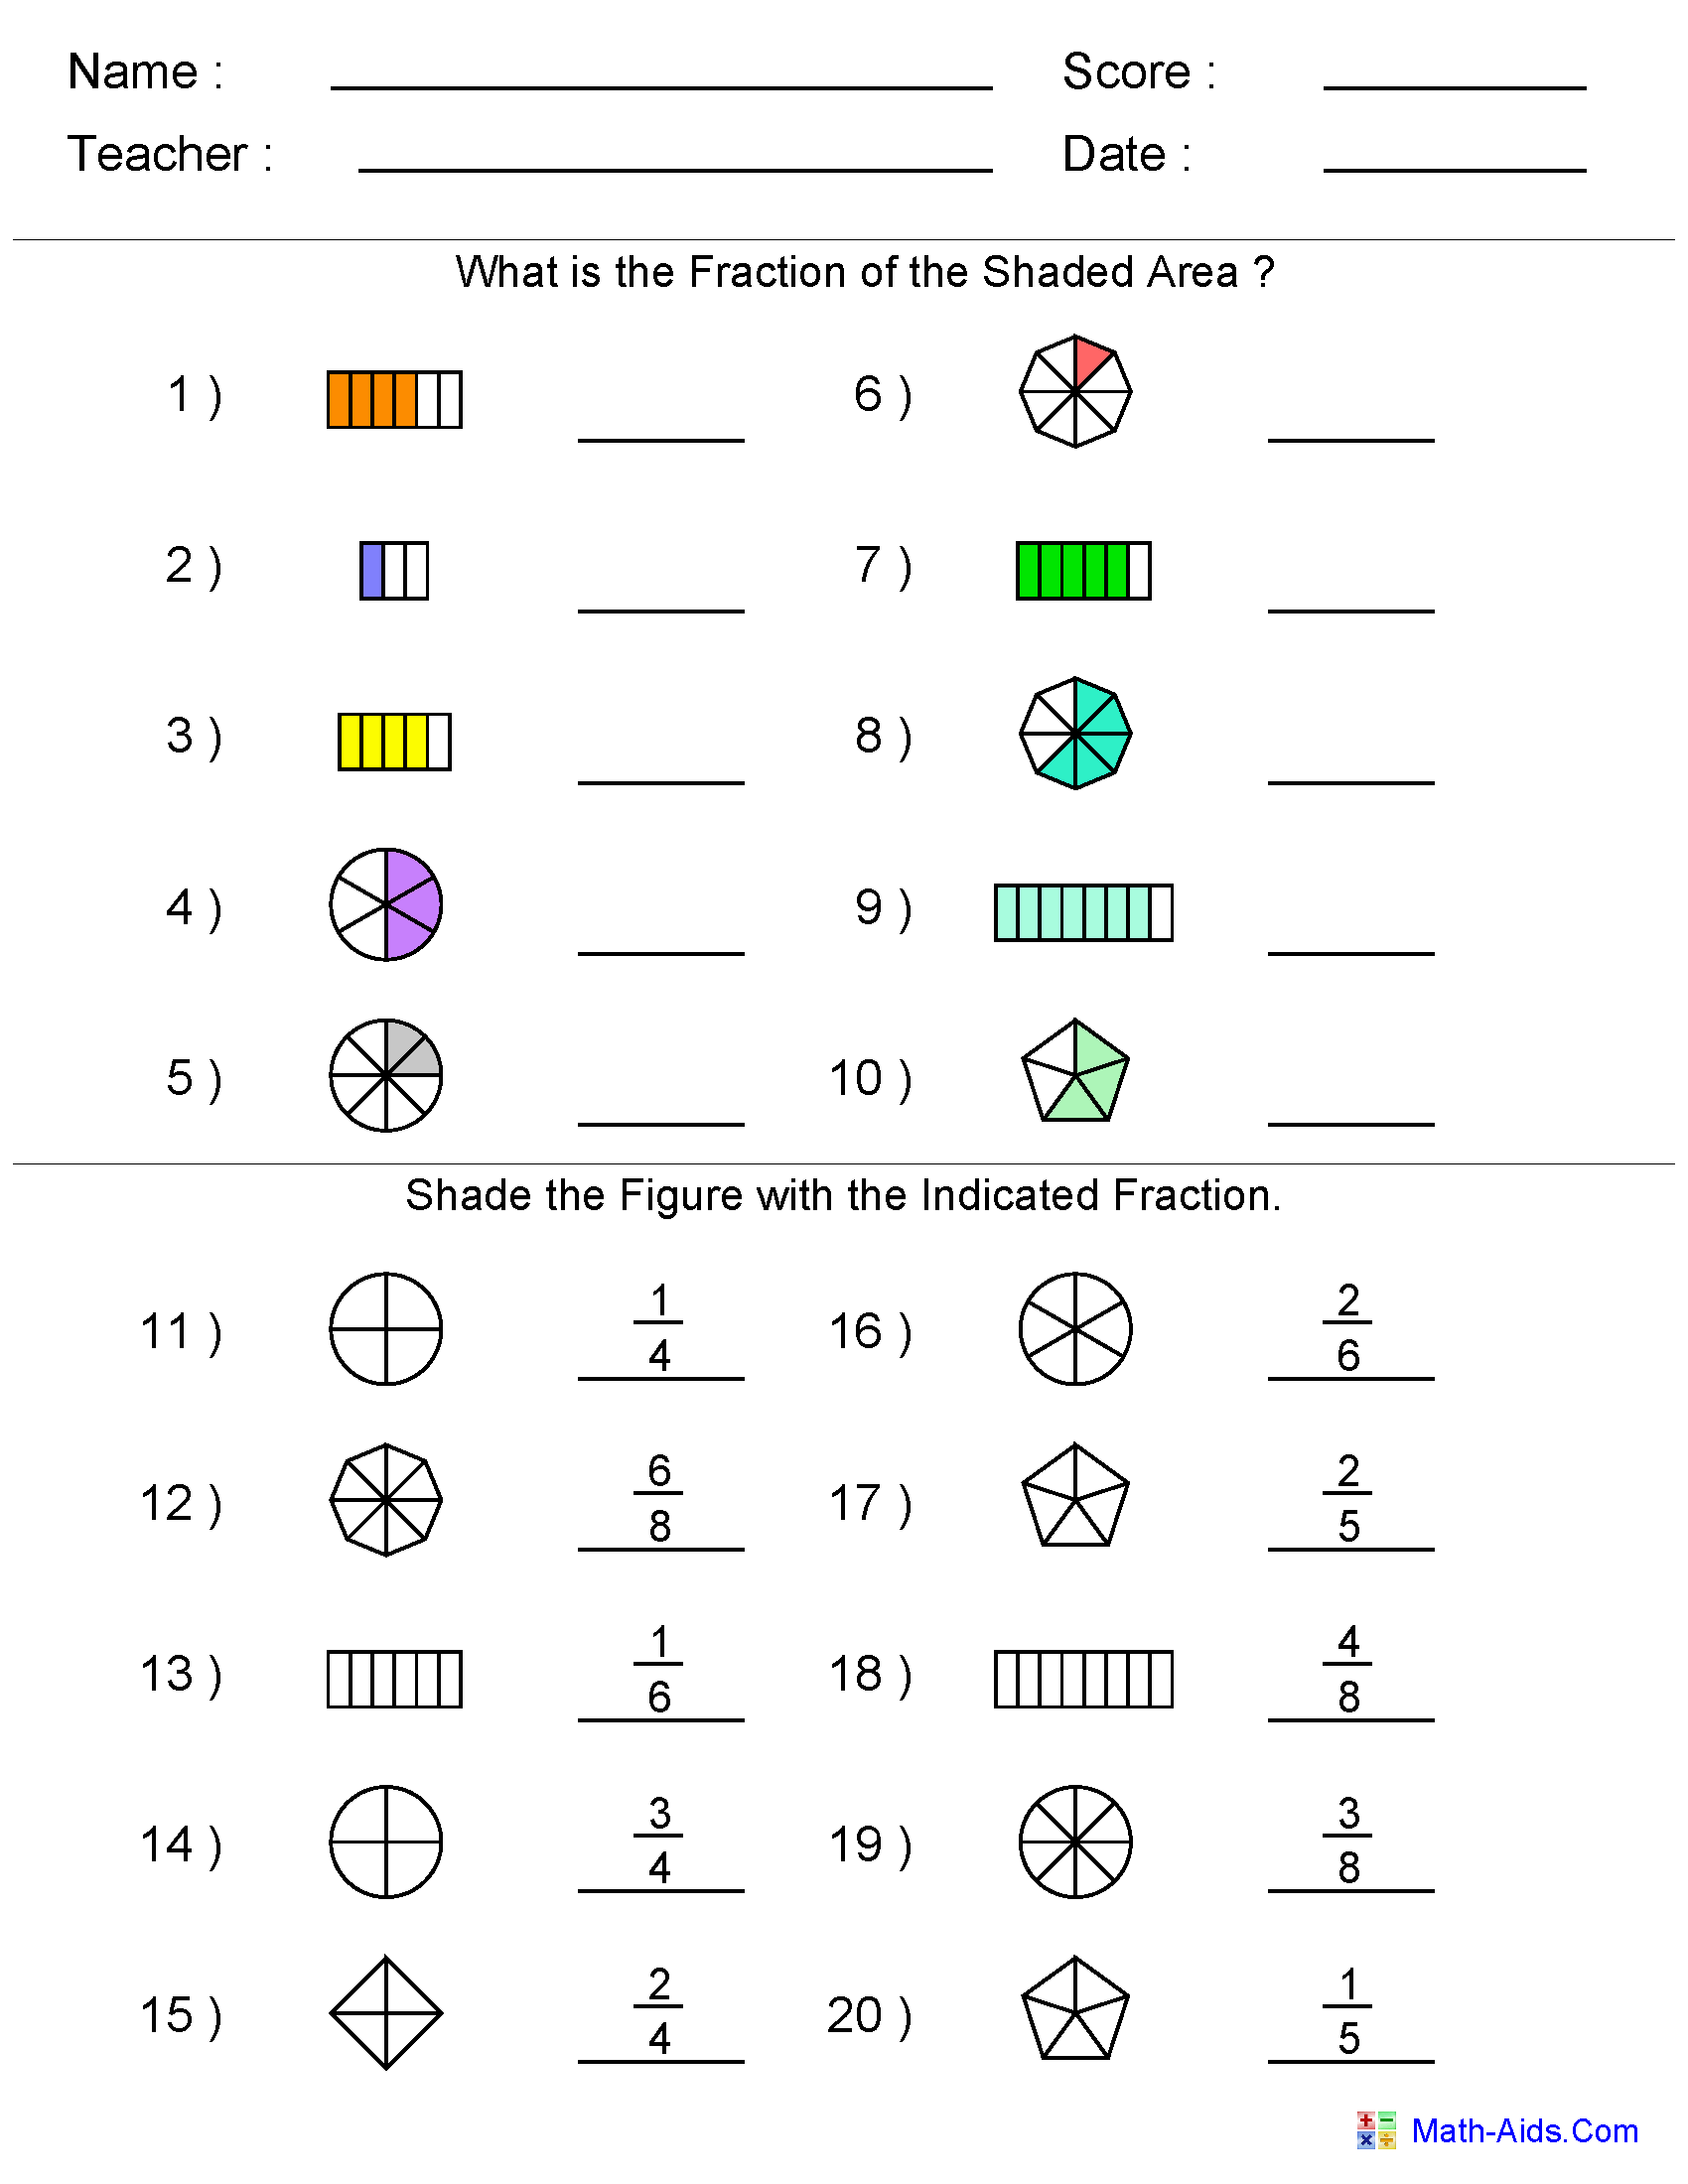 5-best-images-of-fraction-test-printable-with-answer-printable-math-worksheets-fractions